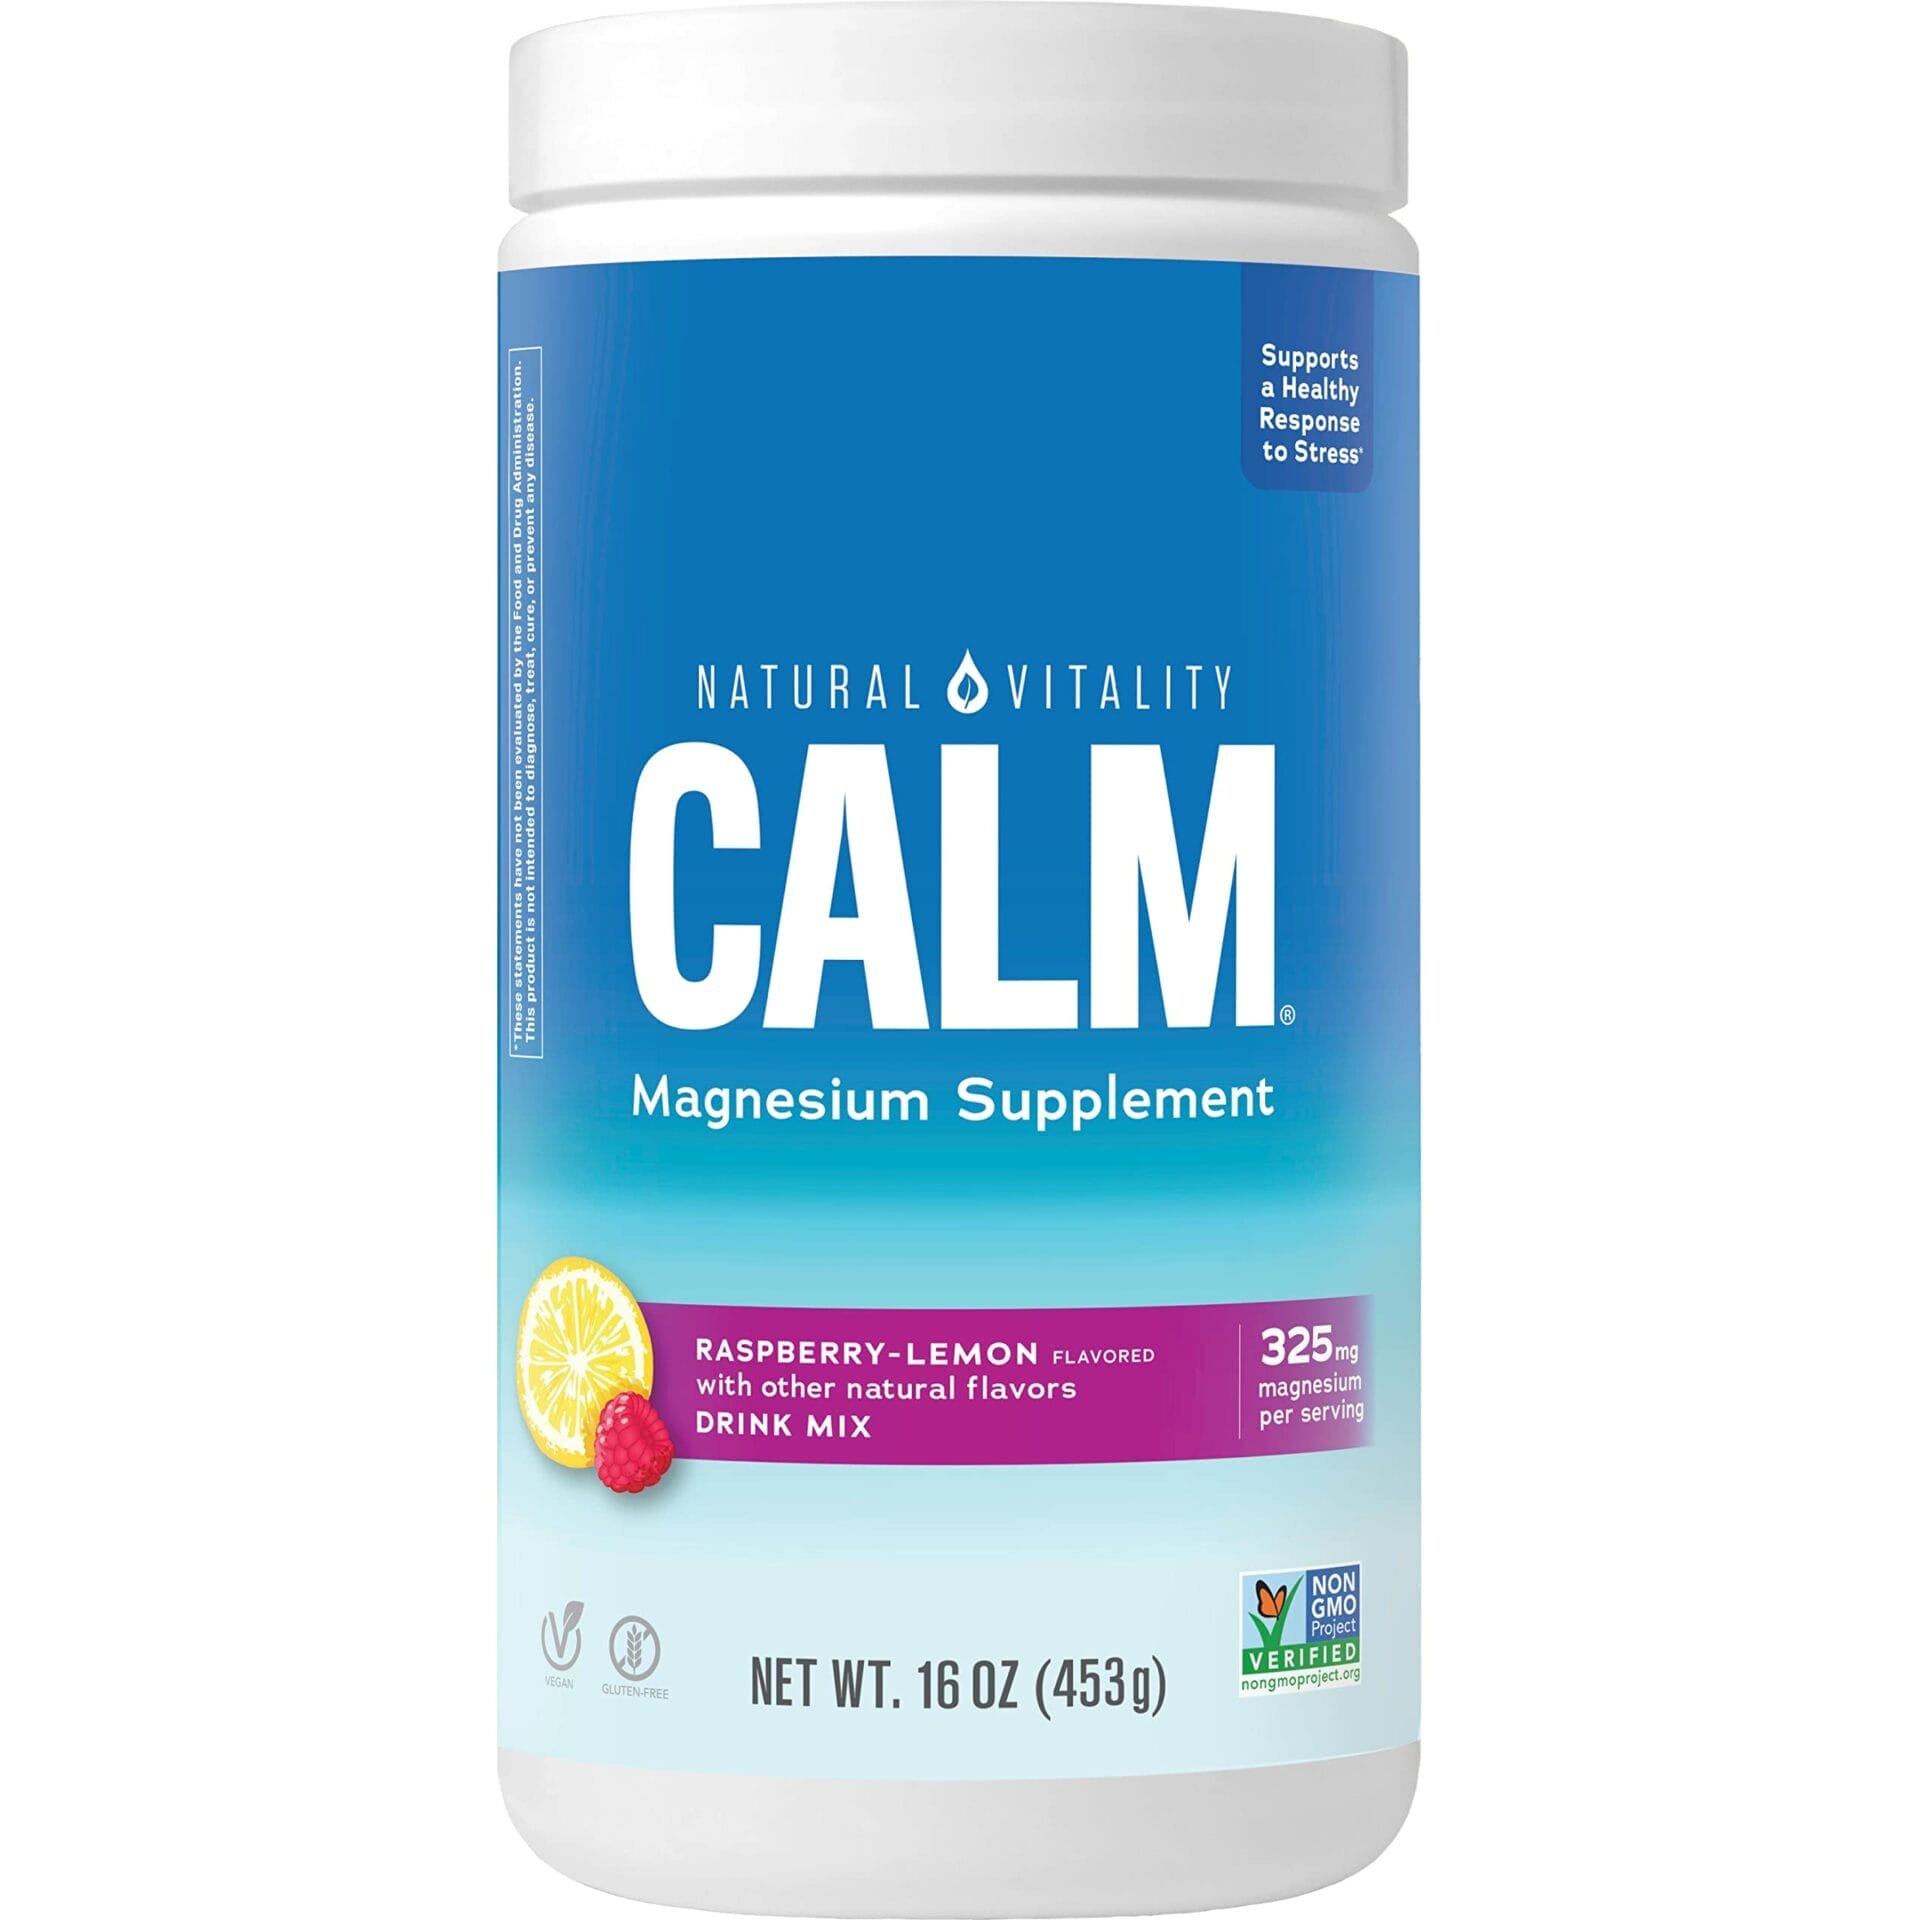 Natural Vitality Calm Drink Mix